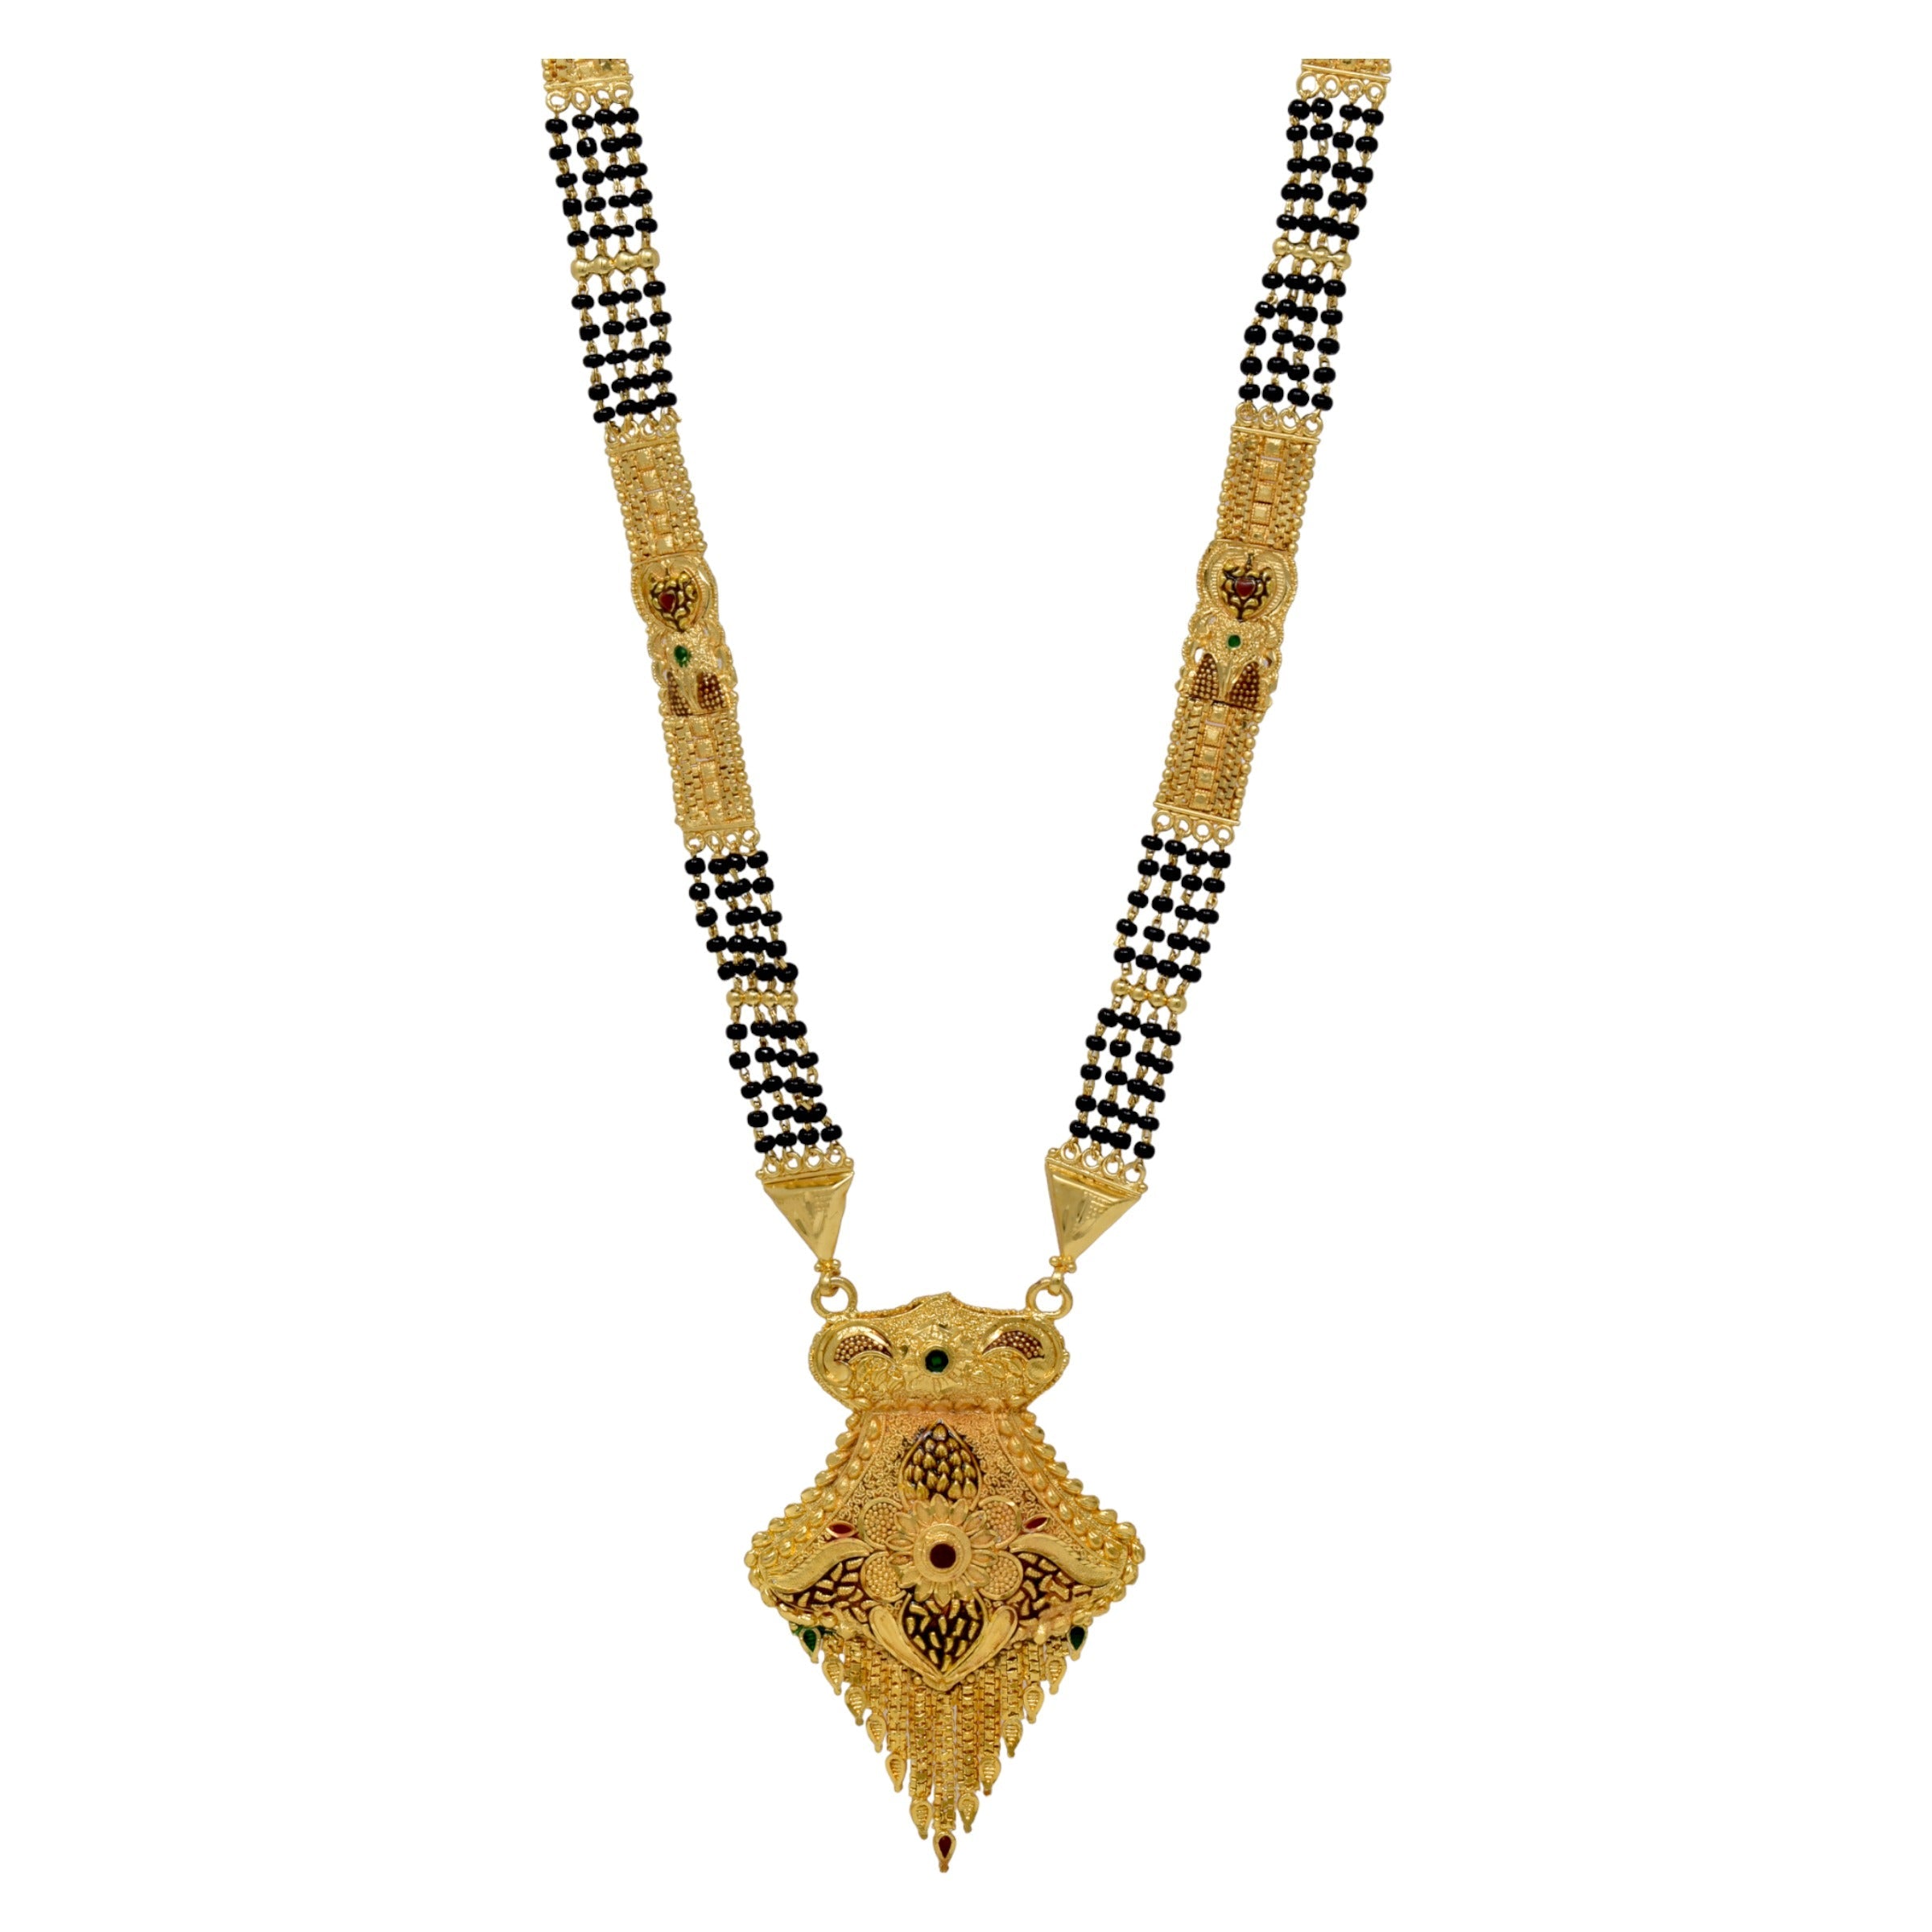 Golden and black beads chain with pendal